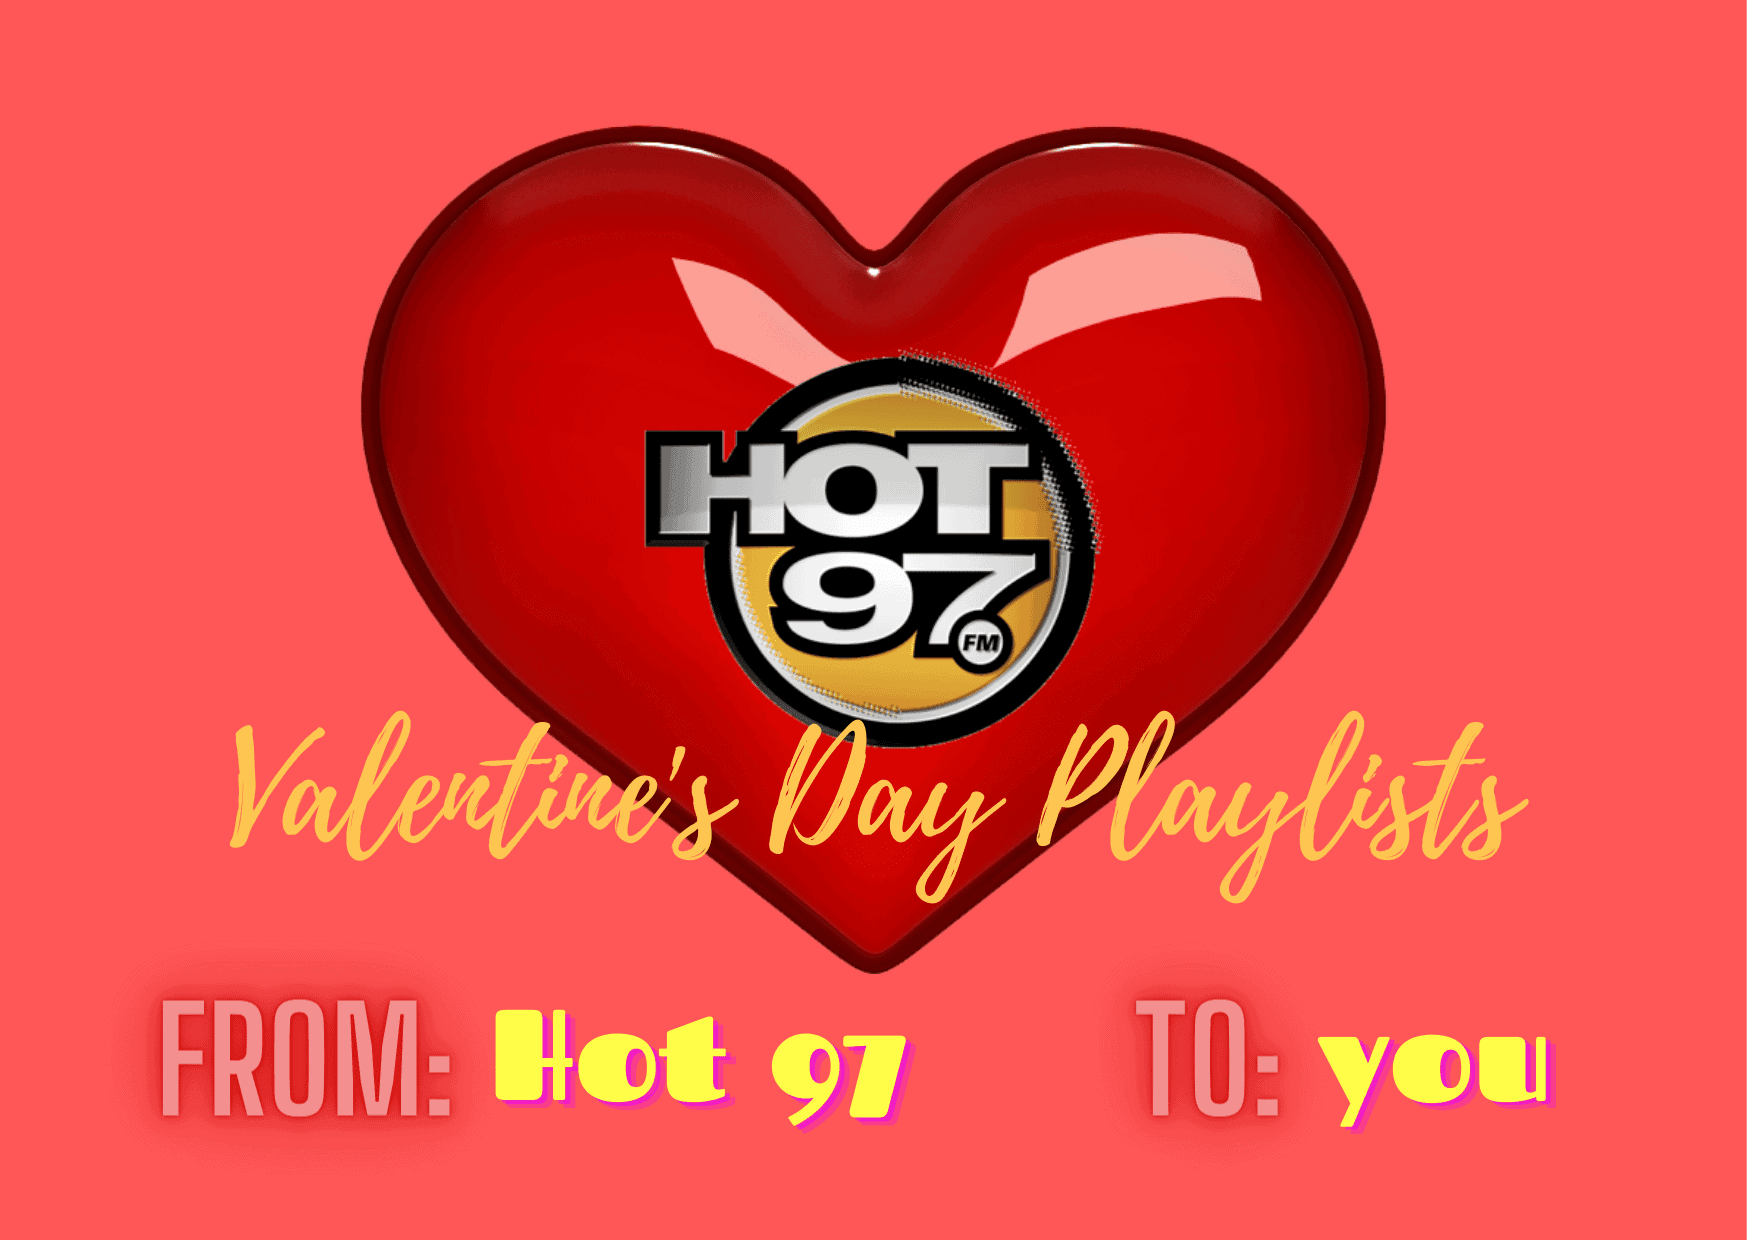 Hot 97 Valentine's Day Playlists for Everyone - Single Or Taken